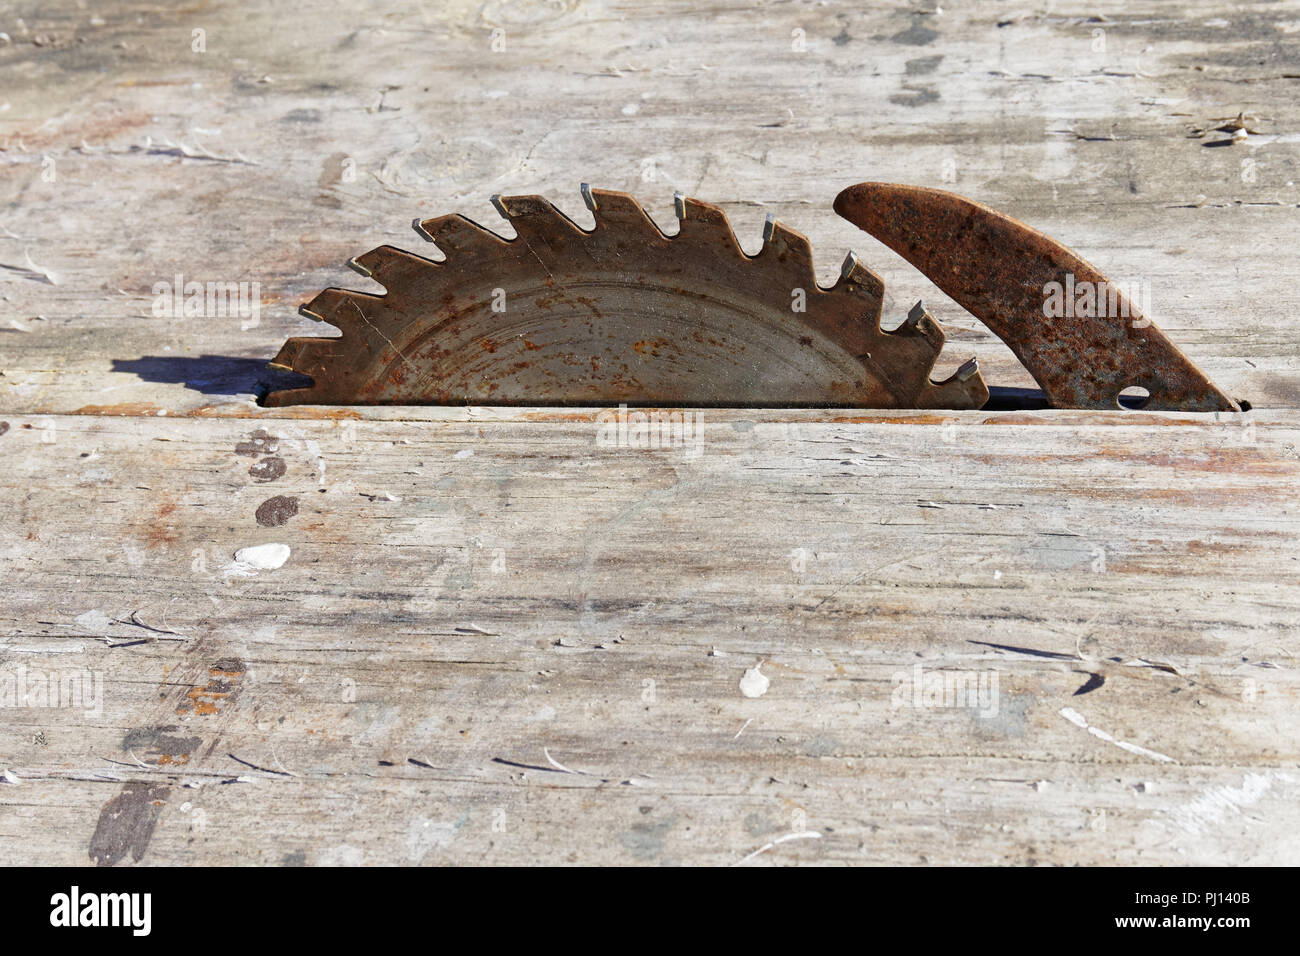 Rusty old circular saw in a wooden bench Stock Photo